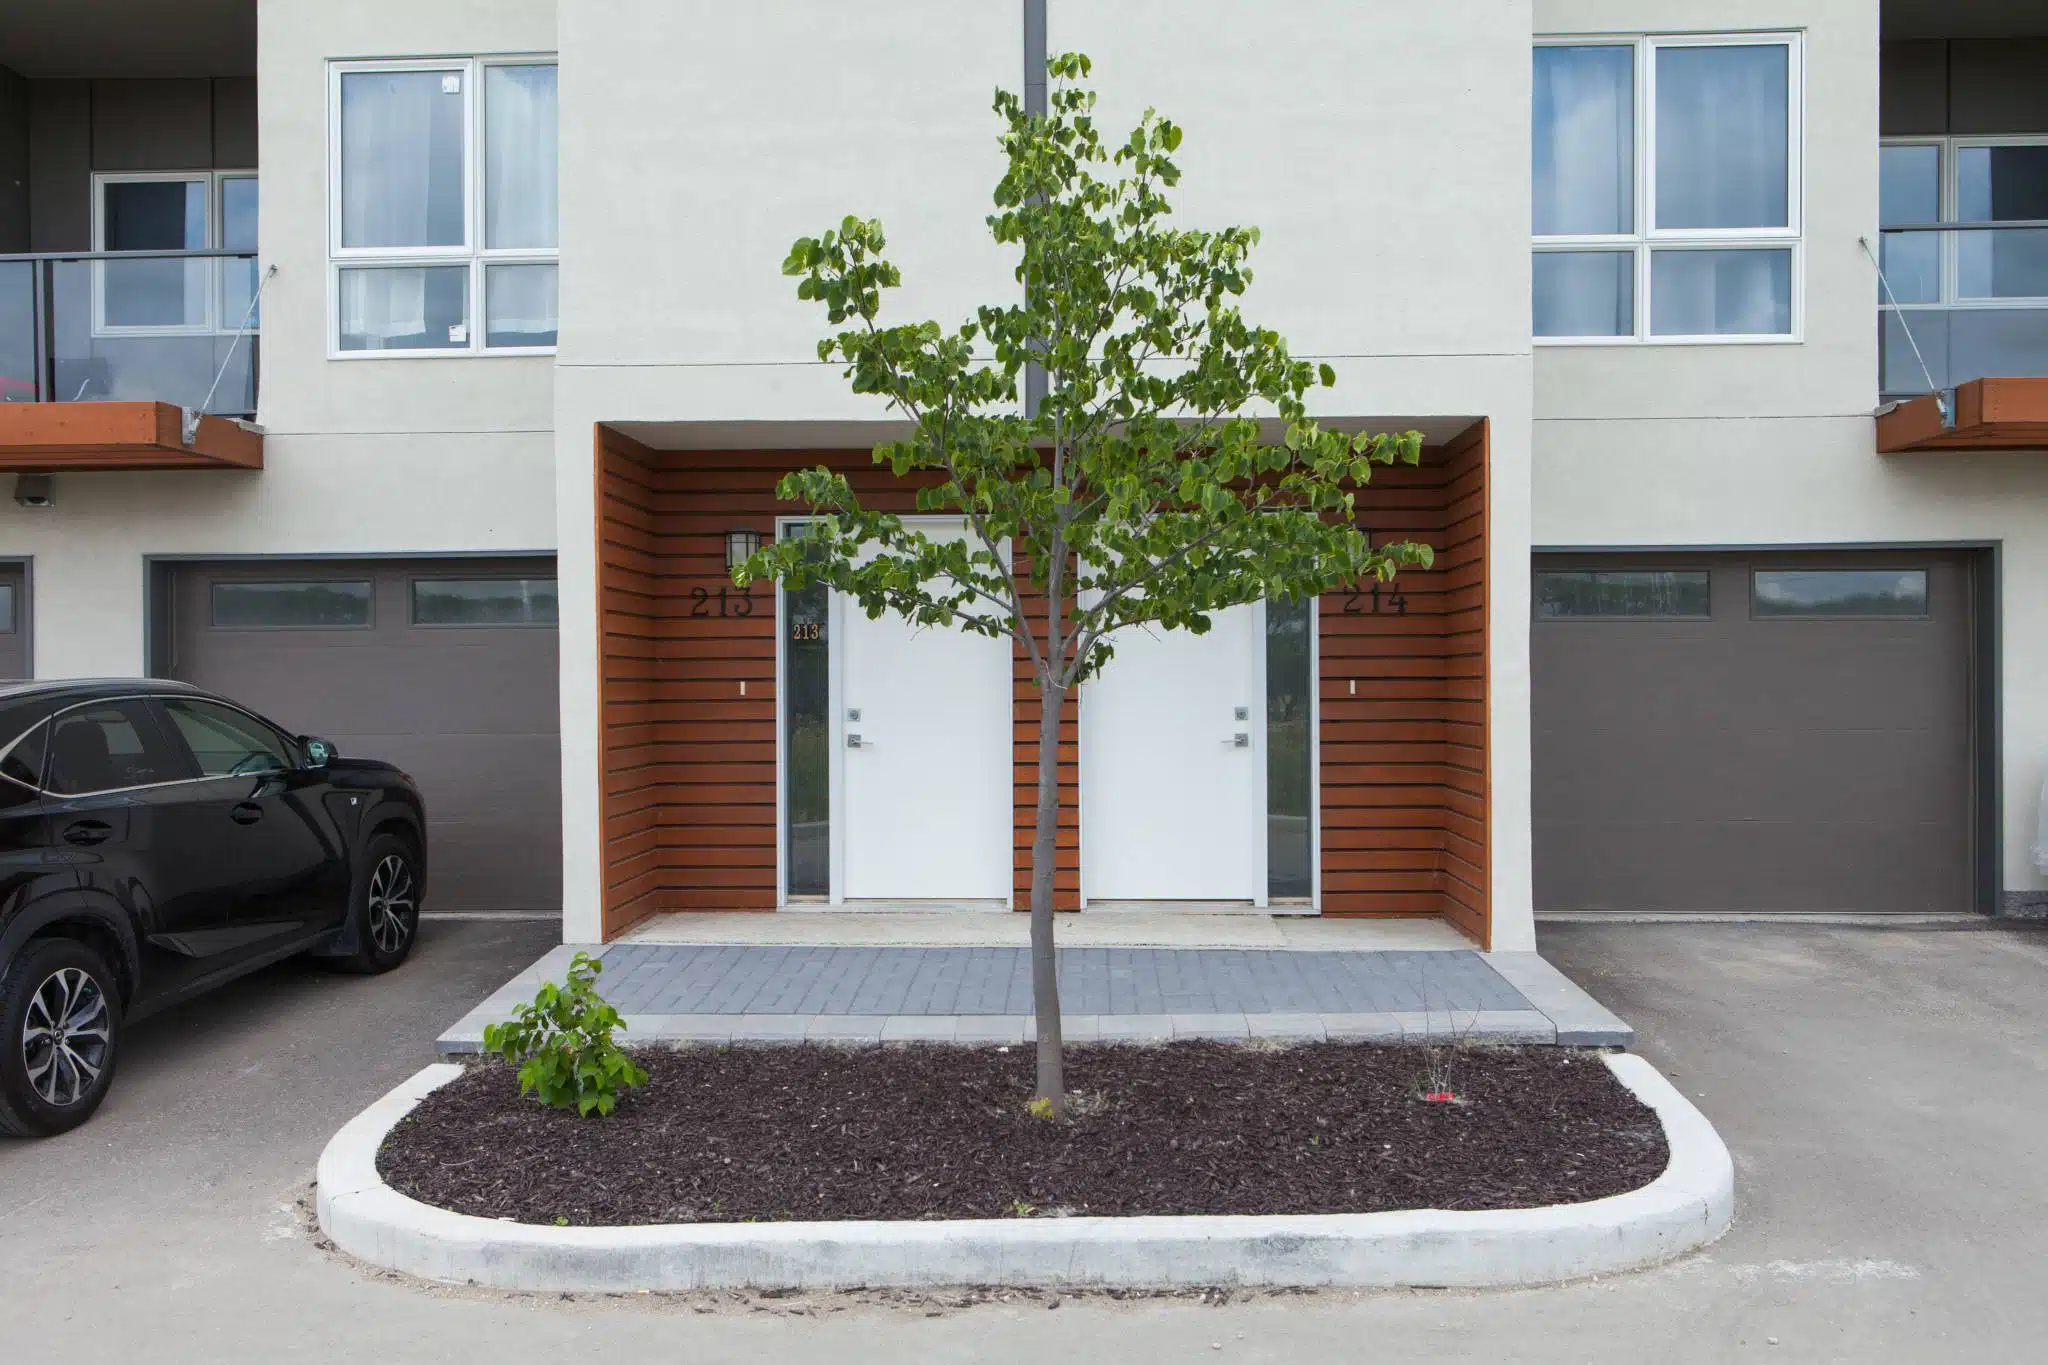 Two modern townhouse entrances (215 & 214) with small tree, driveway, and parked car